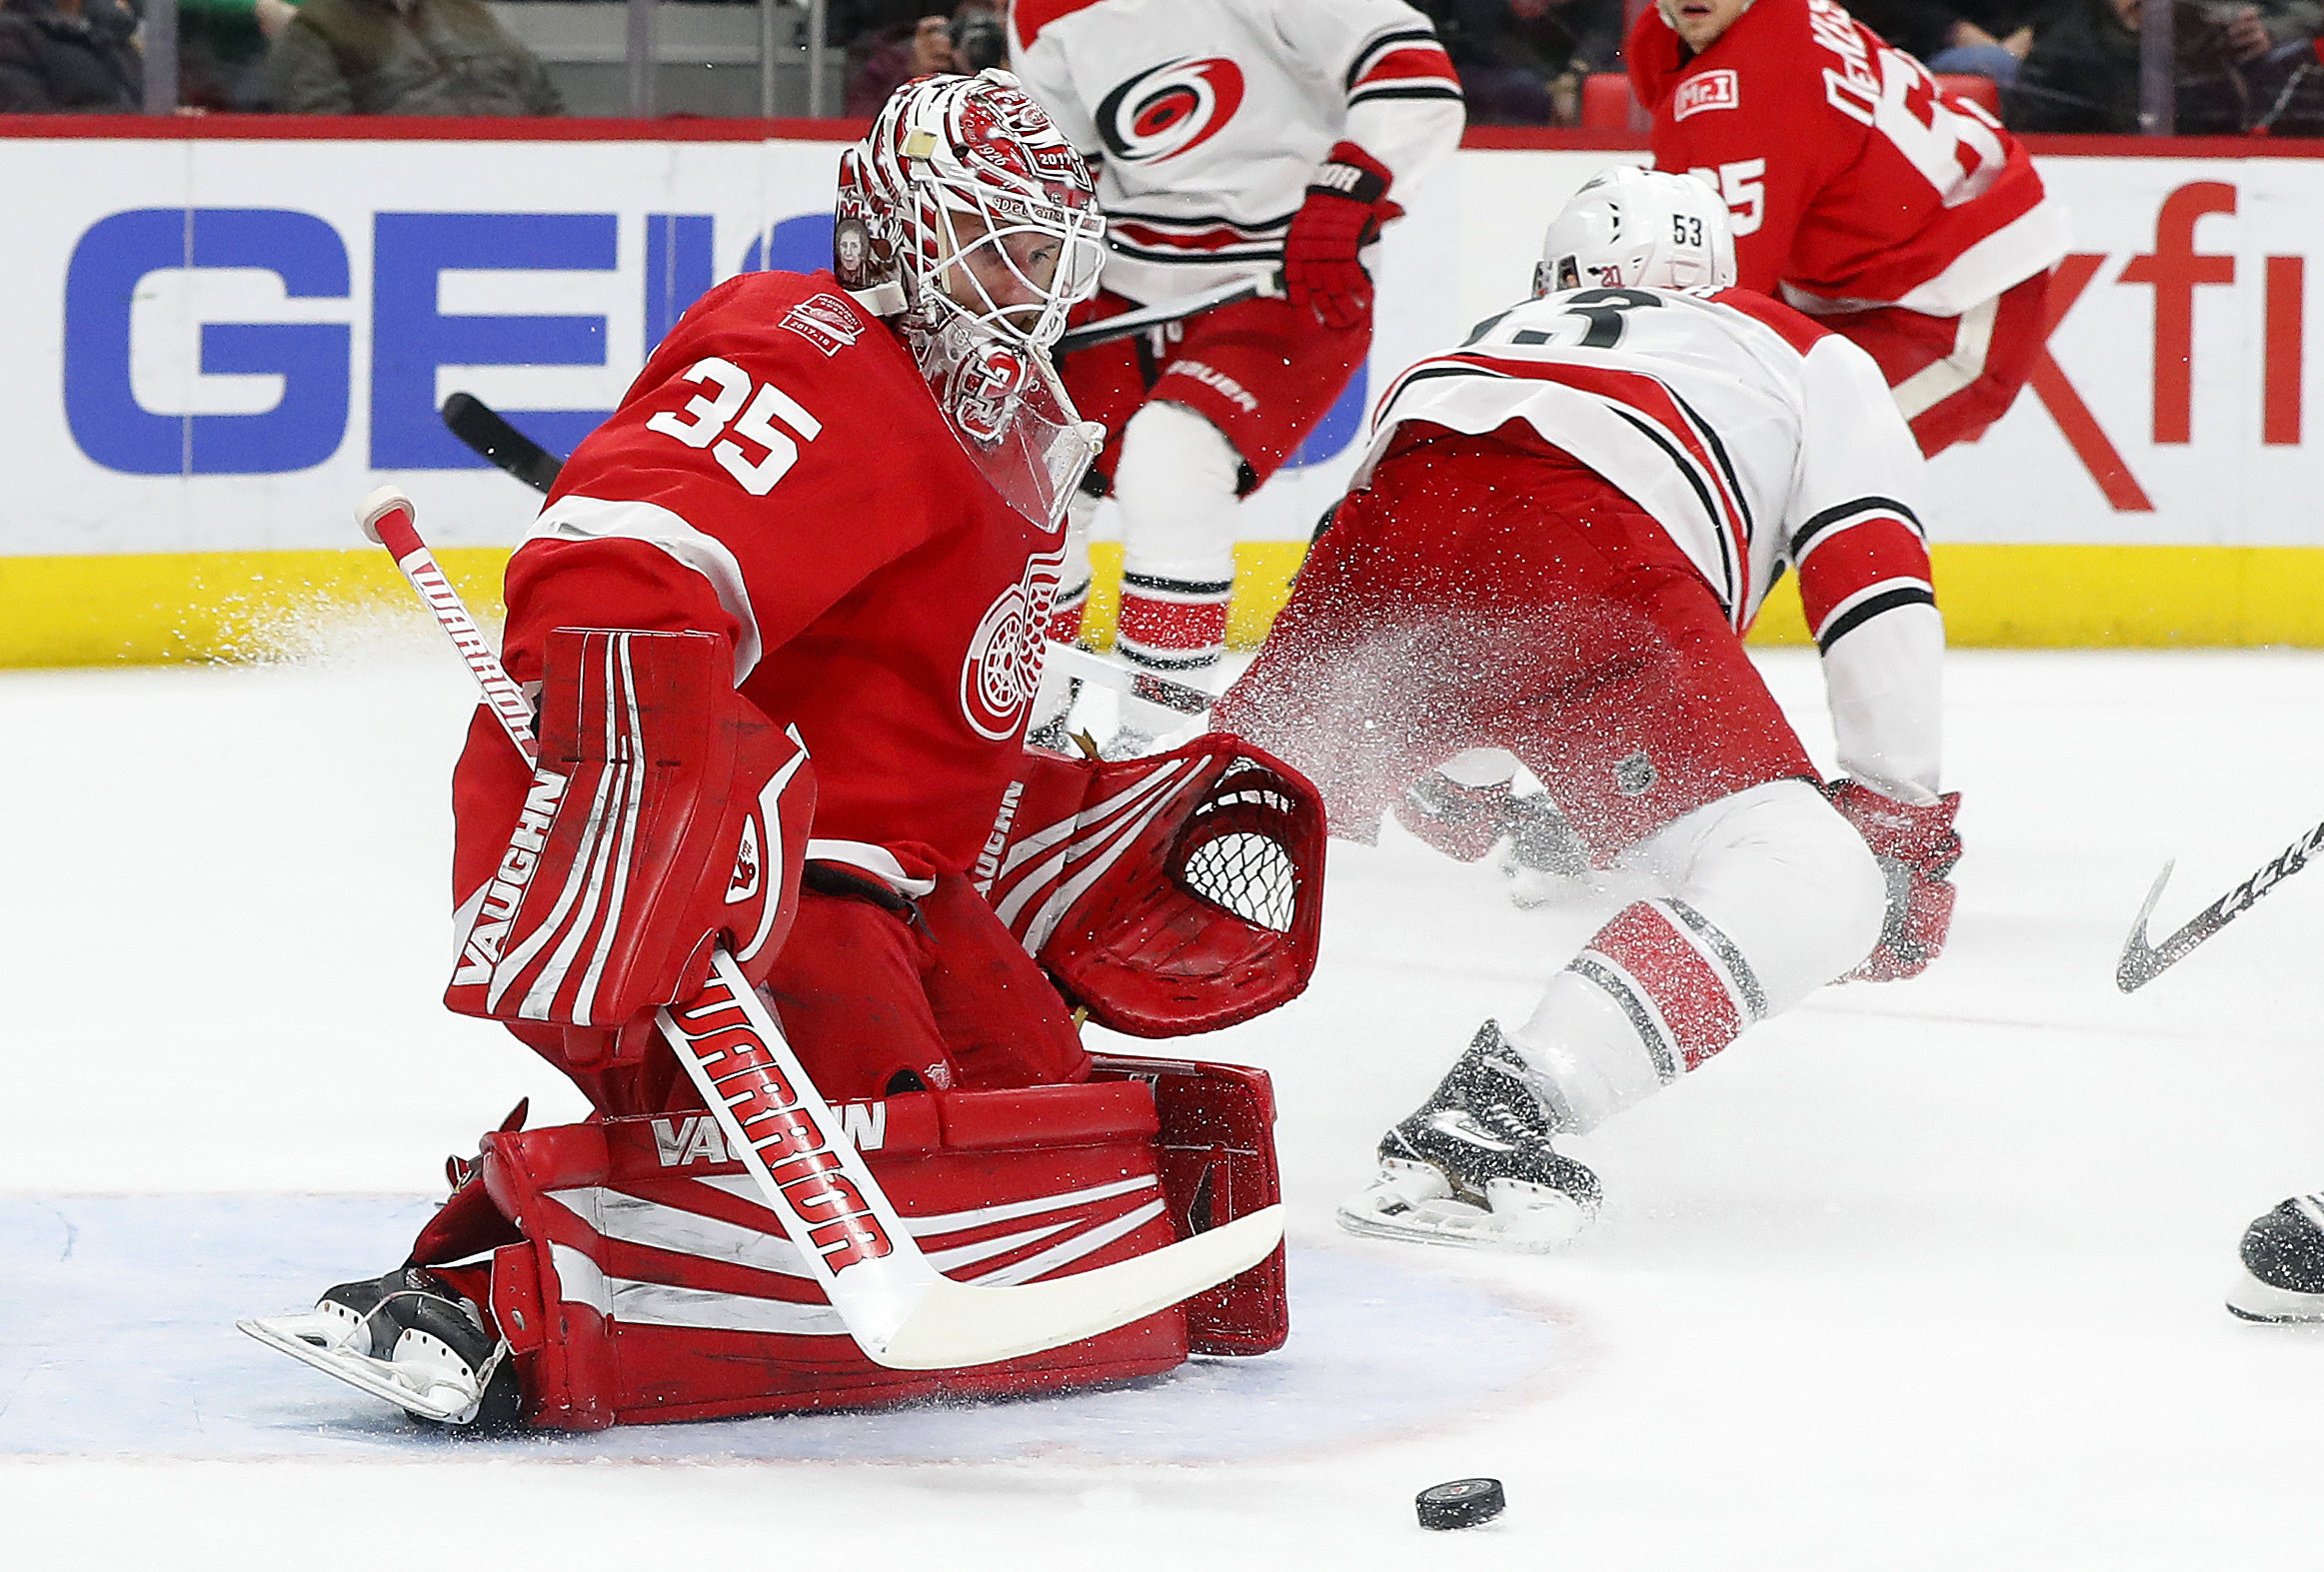 Hurricanes push past Red Wings in third period - The Blade